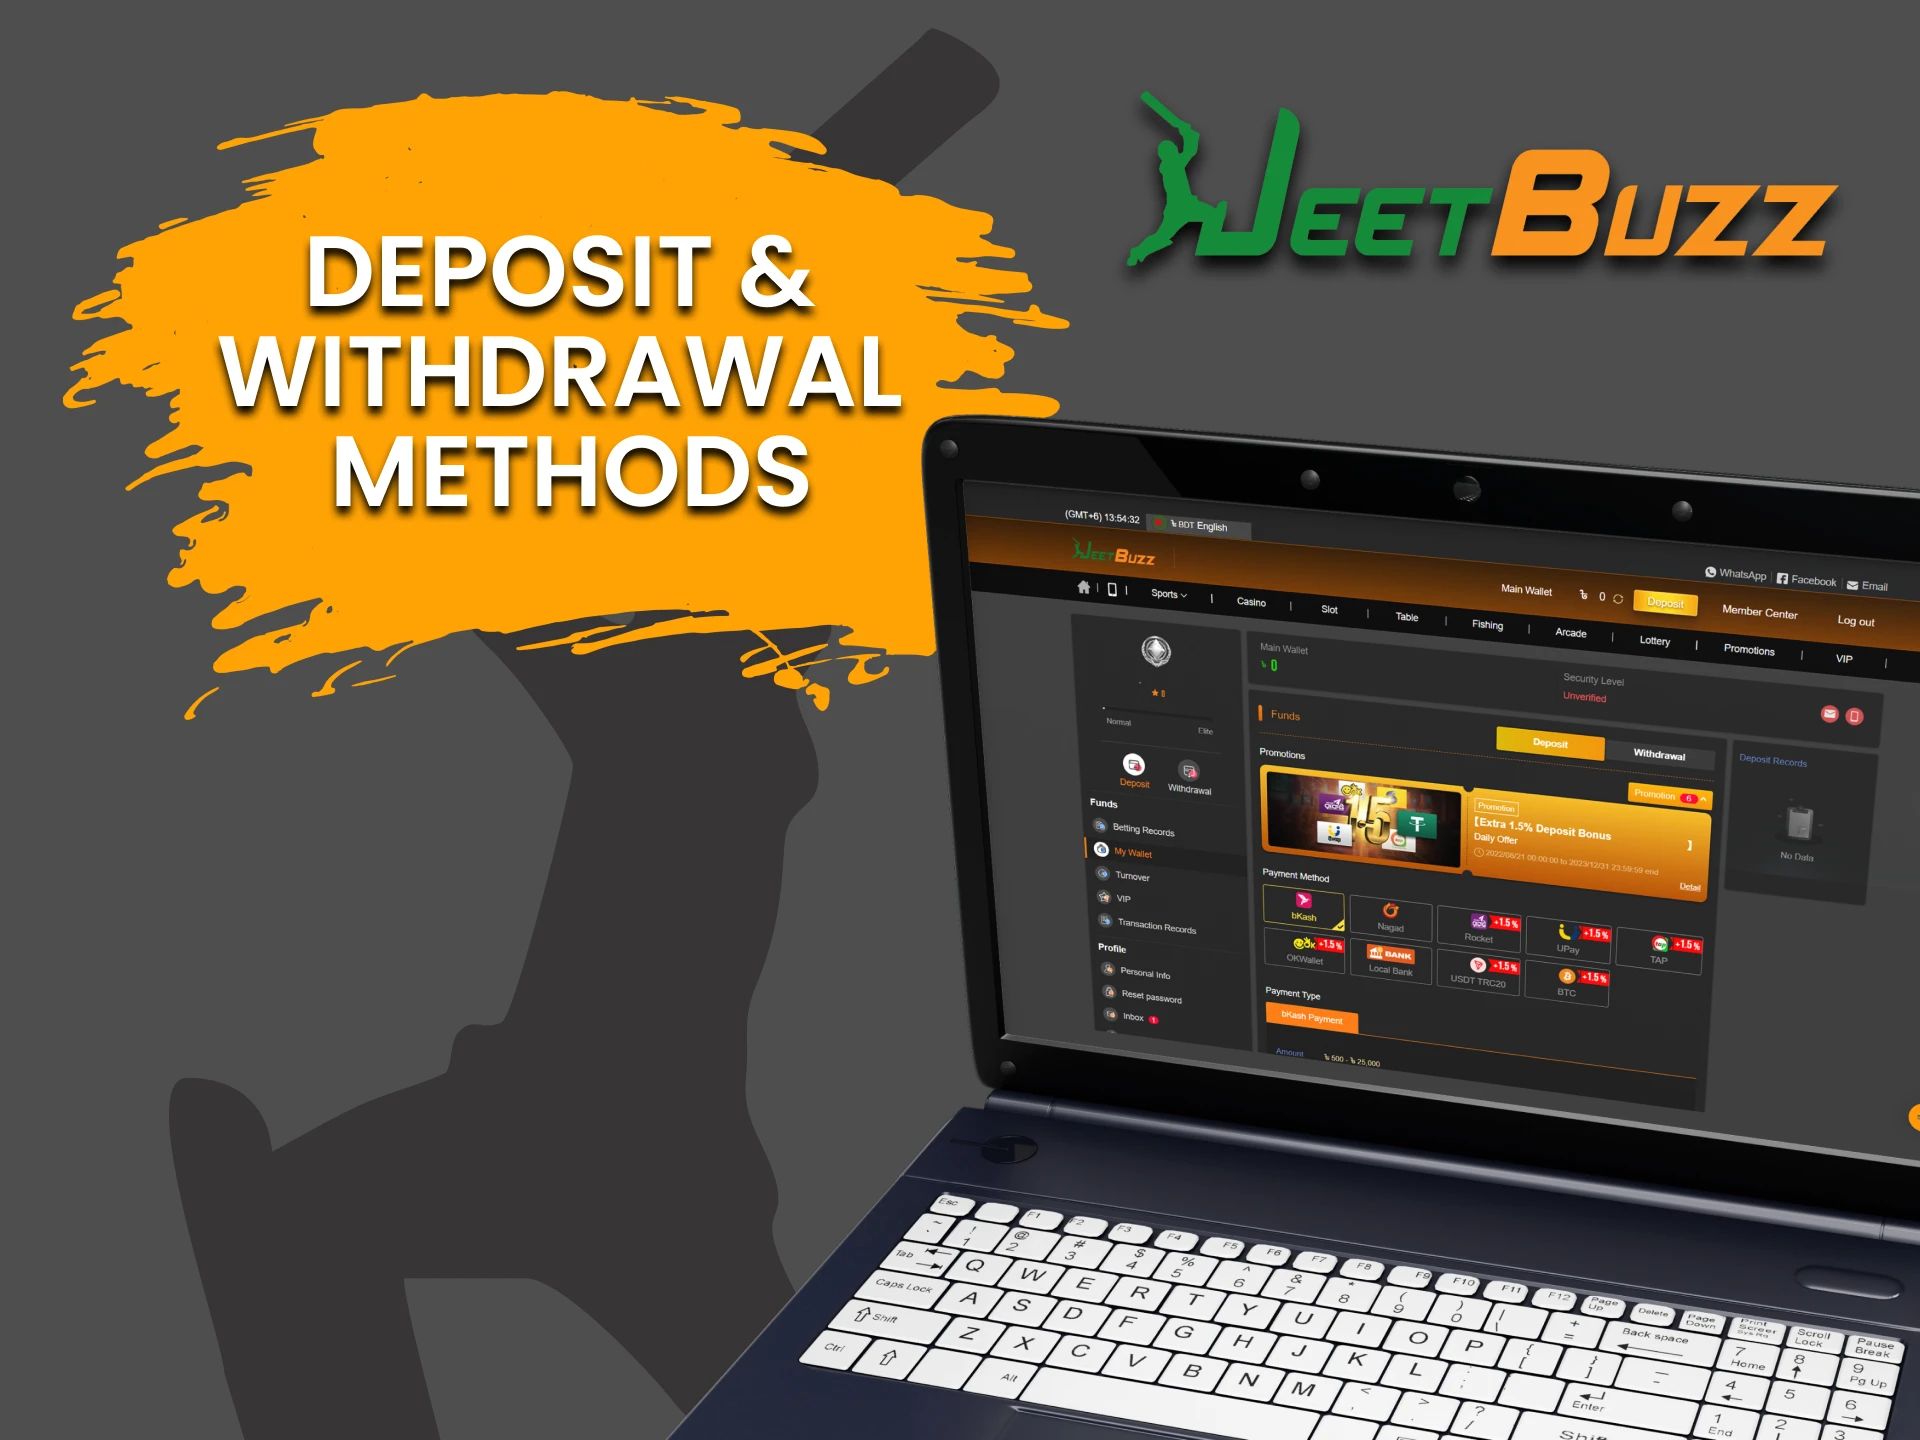 Find out how to withdraw and deposit on JeetBuzz.